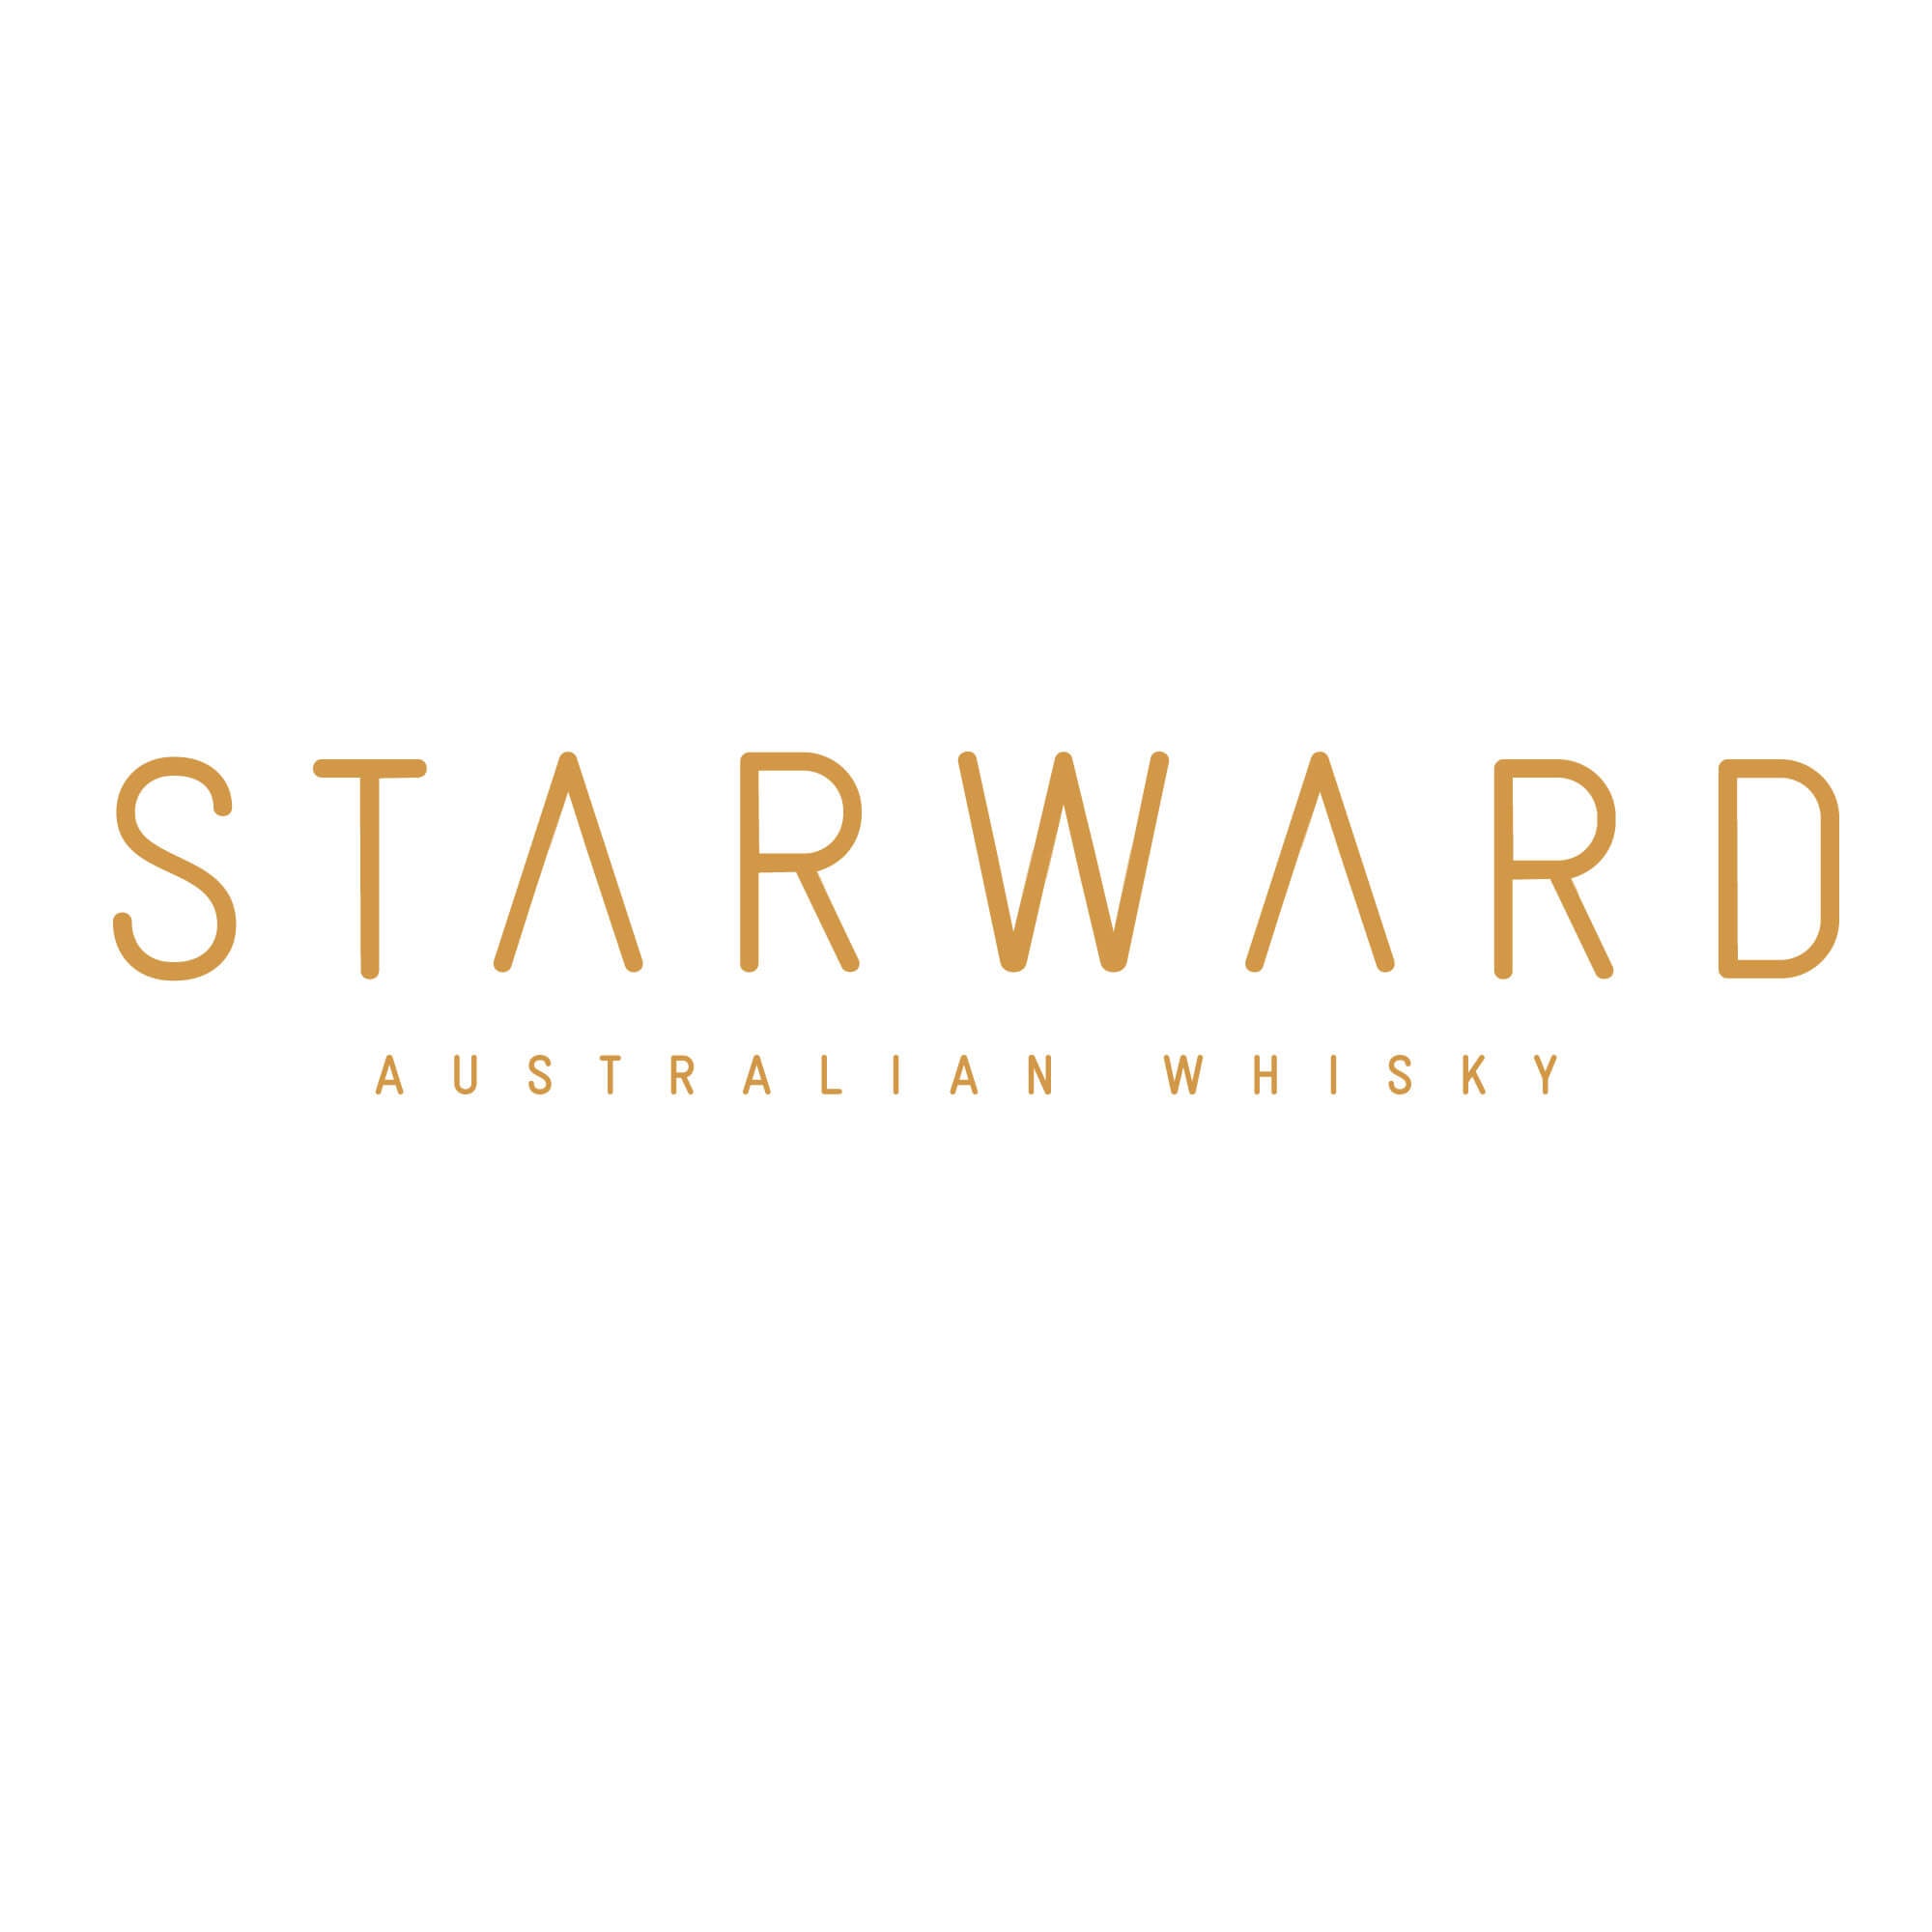 Learn more about Starward Australian Whisky, explore and purchase their range of products online at Wine Sellers Direct - Australia's independent liquor specialists. 